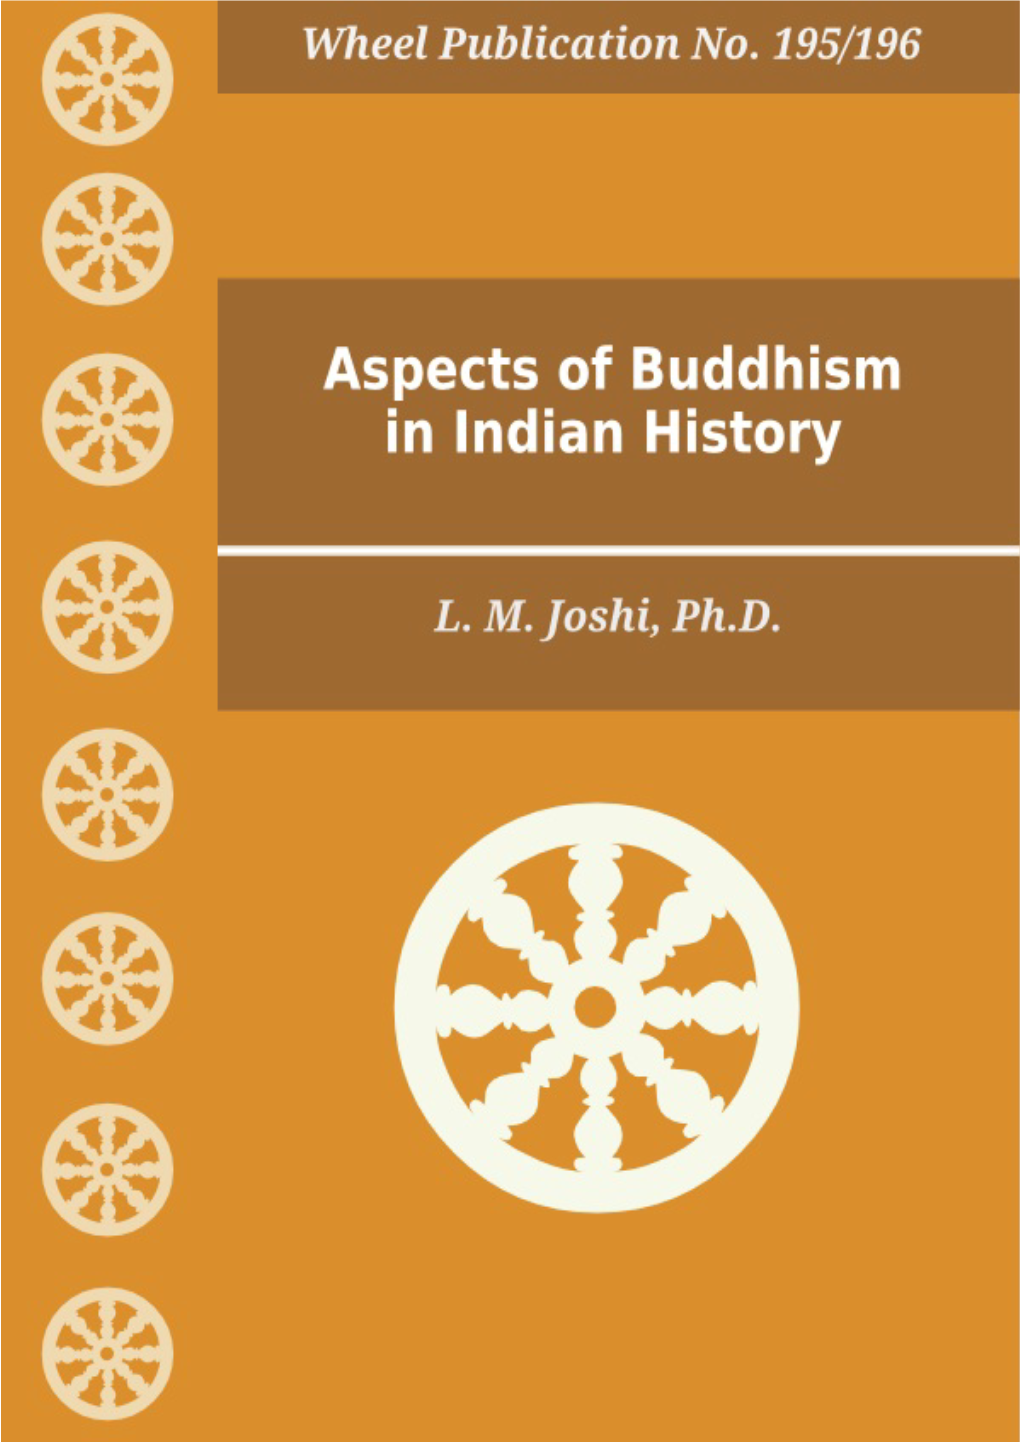 Wh 195.196. Aspects of Buddhism in Indian History